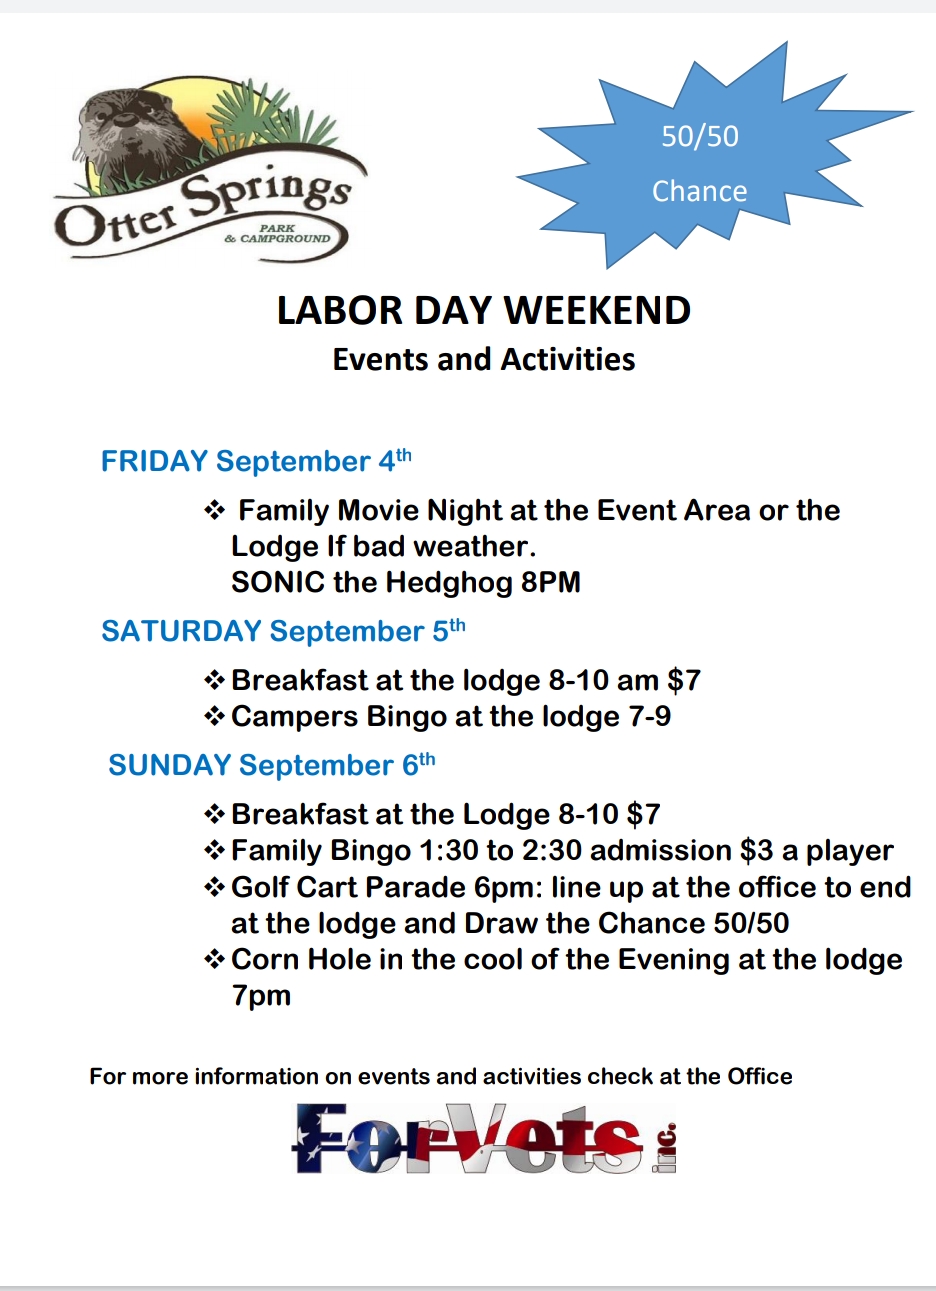 Labor Day Weekend Events 2020 Otter Springs 3524630800